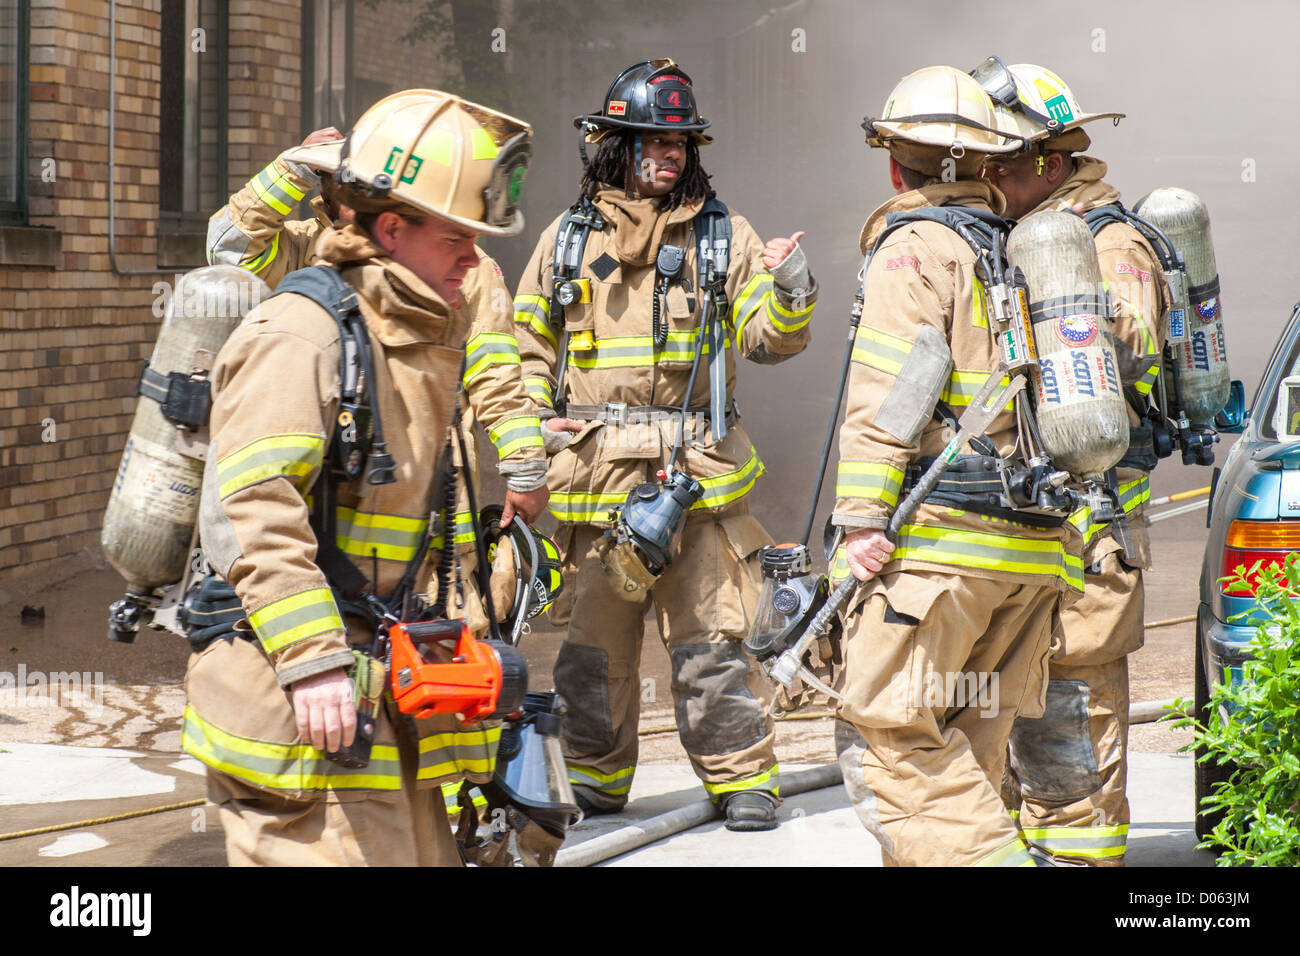 American fire fighters firemen rescue team in front of a burning building, discussing tactics strategy. Diverse crew Caucasian, African-American. Stock Photo